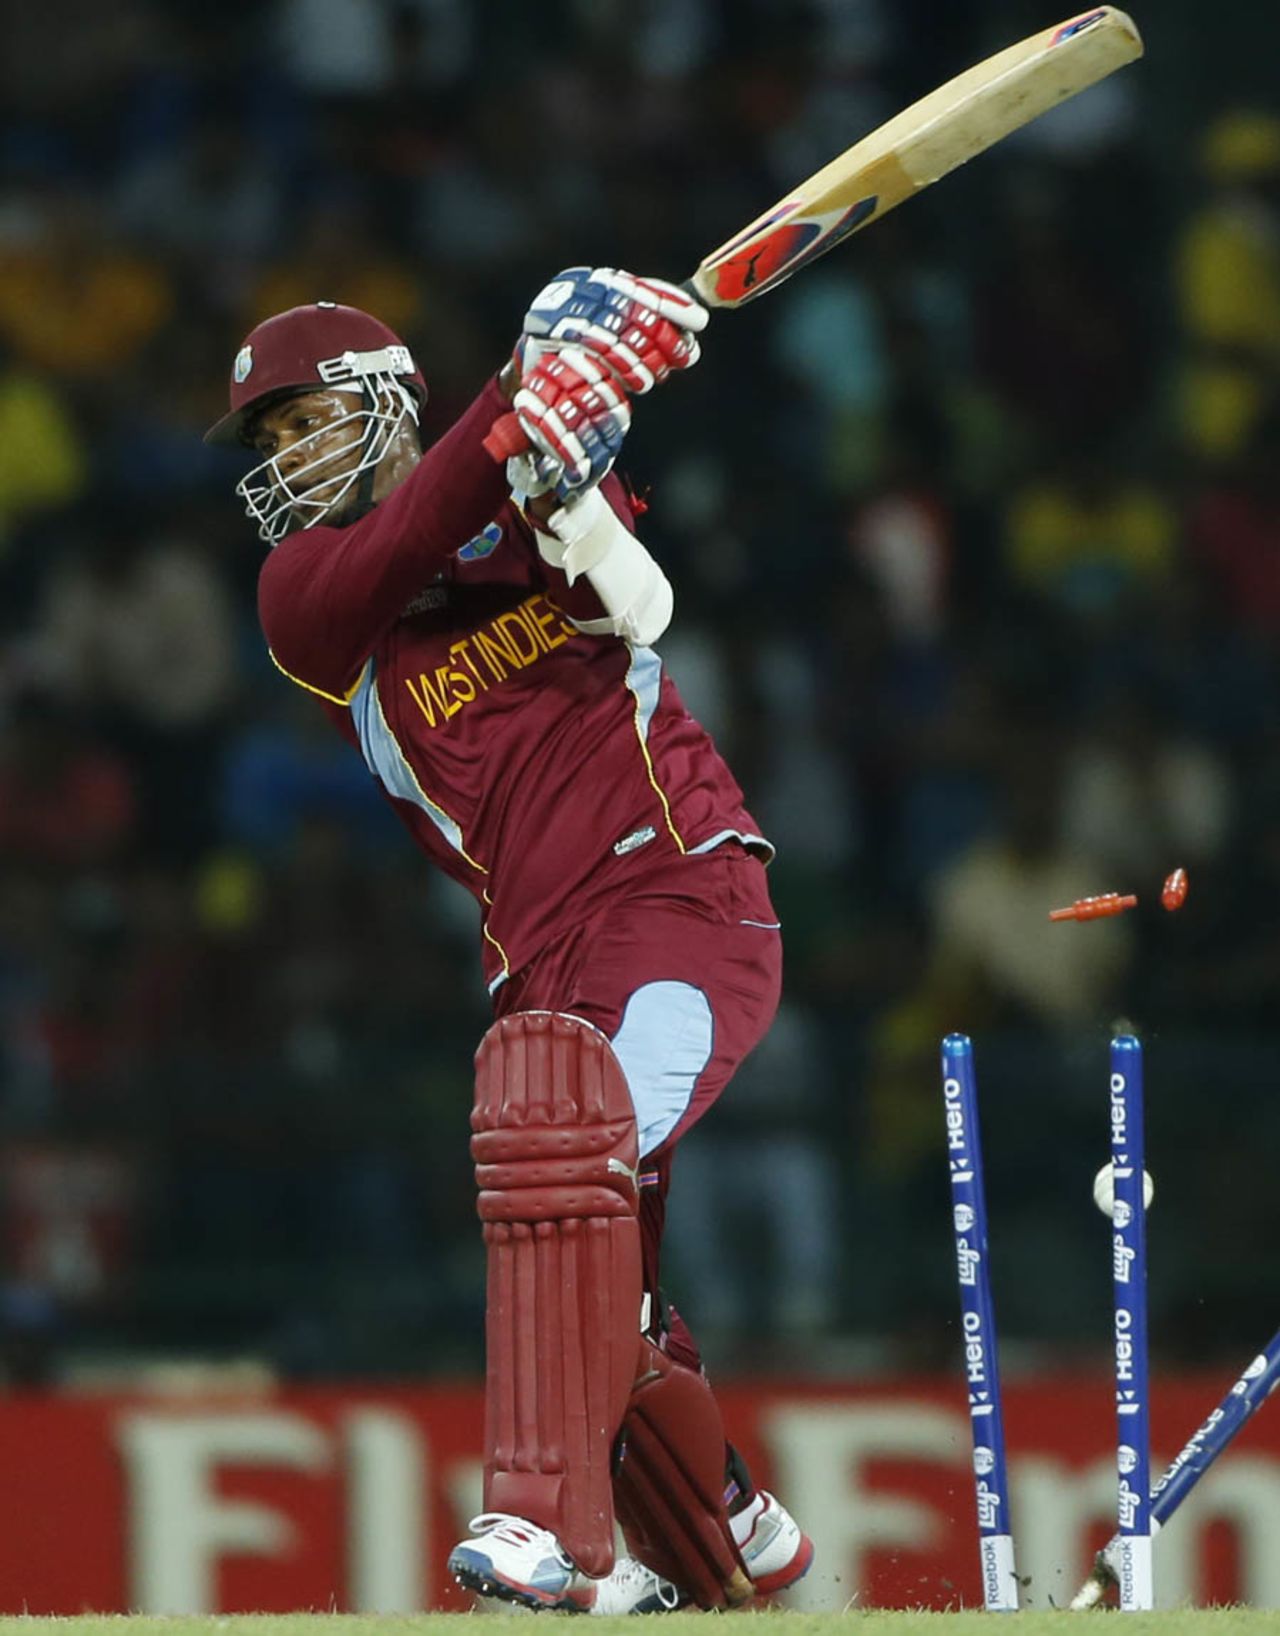 Marlon Samuels is bowled off a slower delivery by Pat Cummins, Australia v West Indies, 2nd semi-final, World Twenty20 2012, Colombo, October 5, 2012